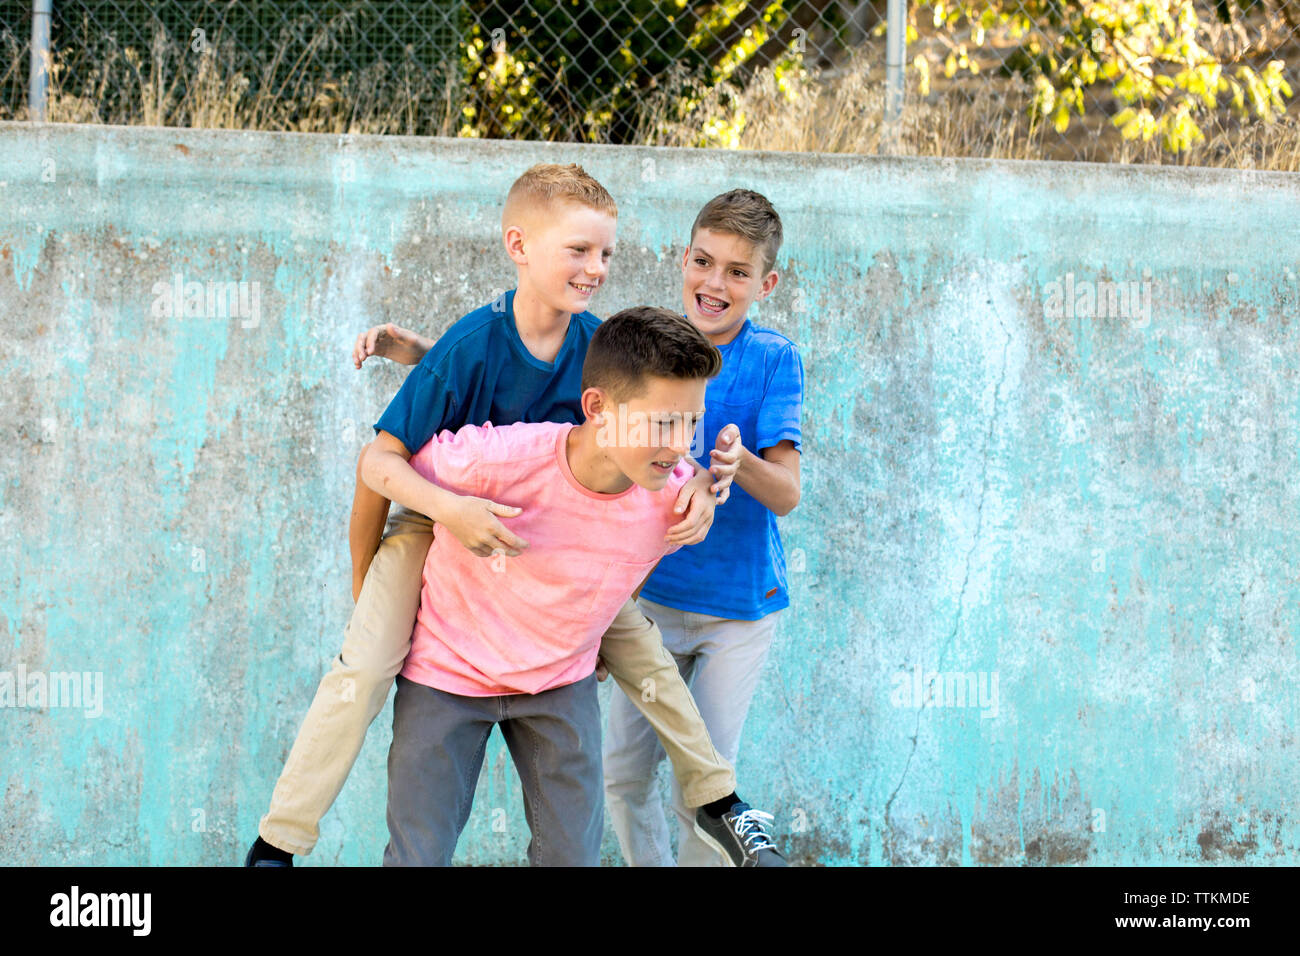 Boy on piggyback anticipates the actions of his older brother Stock Photo